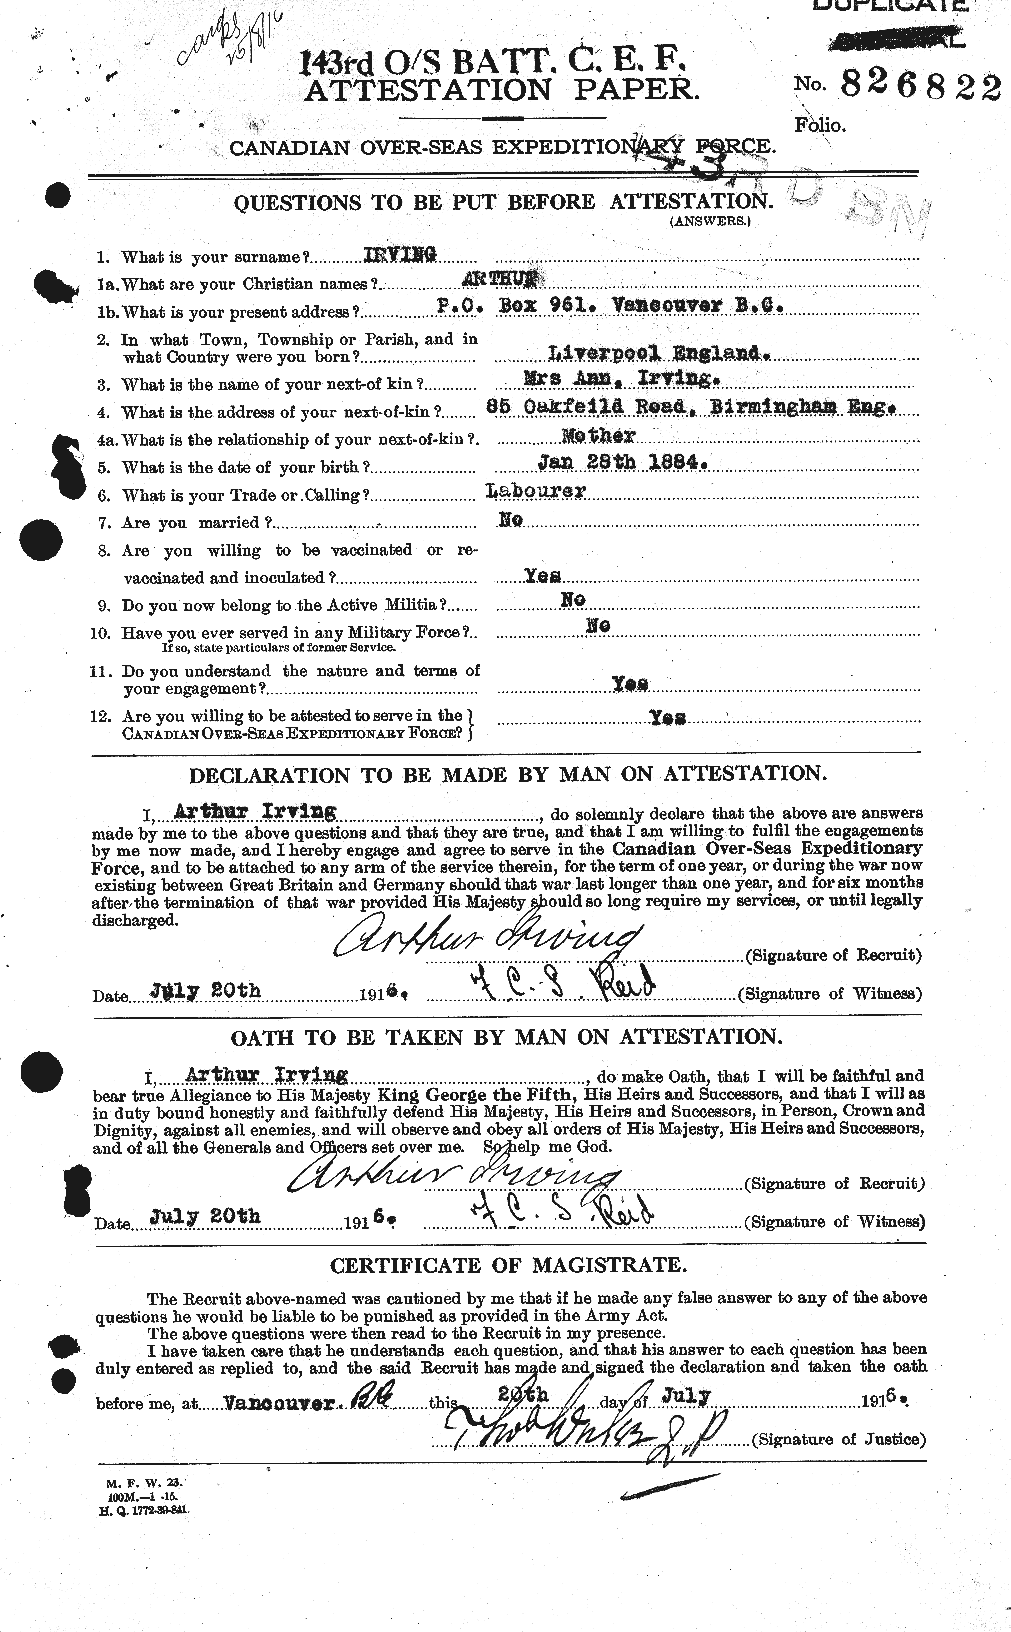 Personnel Records of the First World War - CEF 410607a